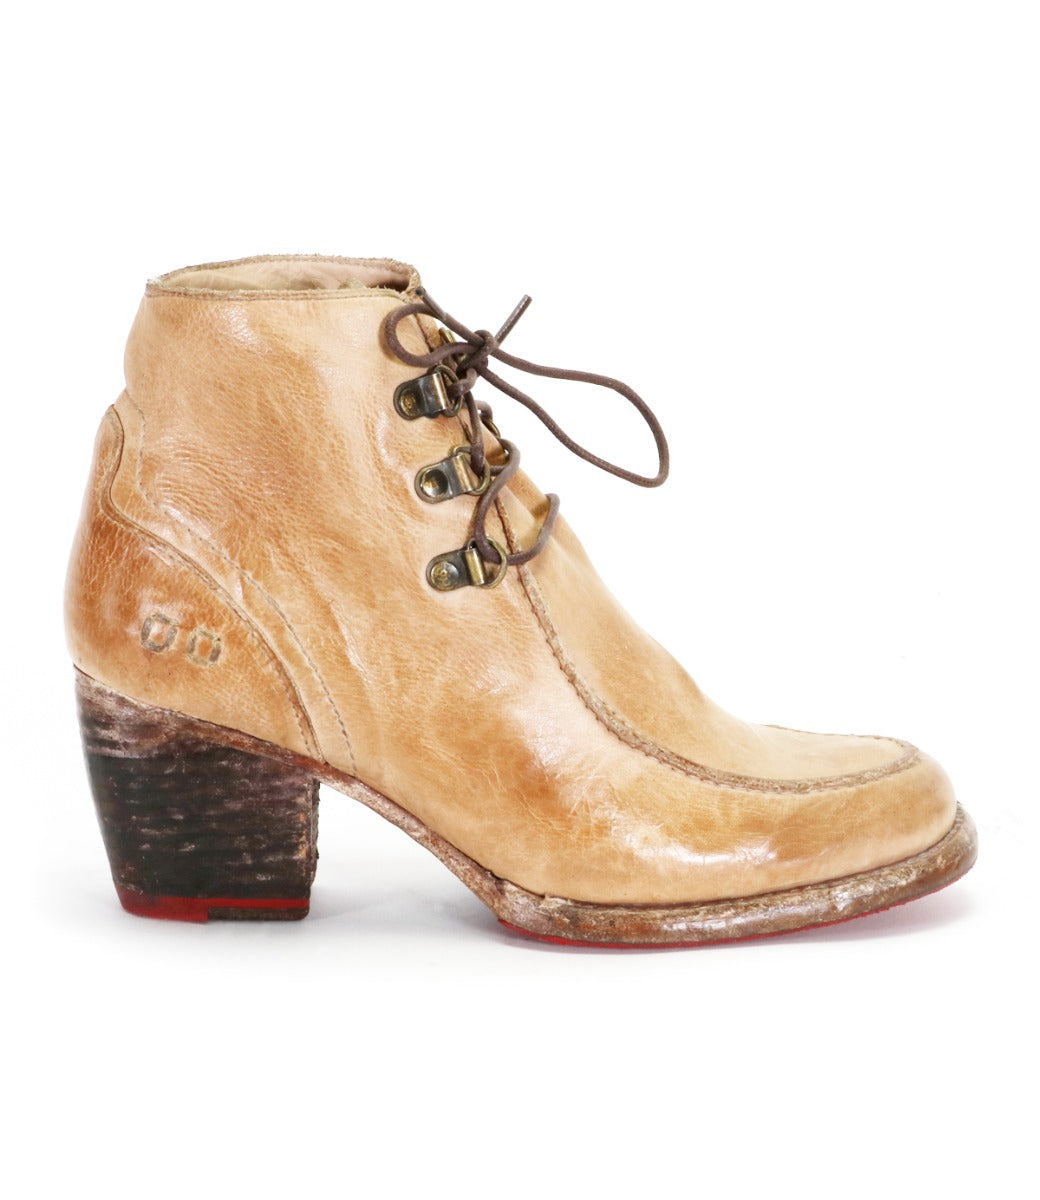 A women's ankle boot in tan leather called Mage by Bed Stu.